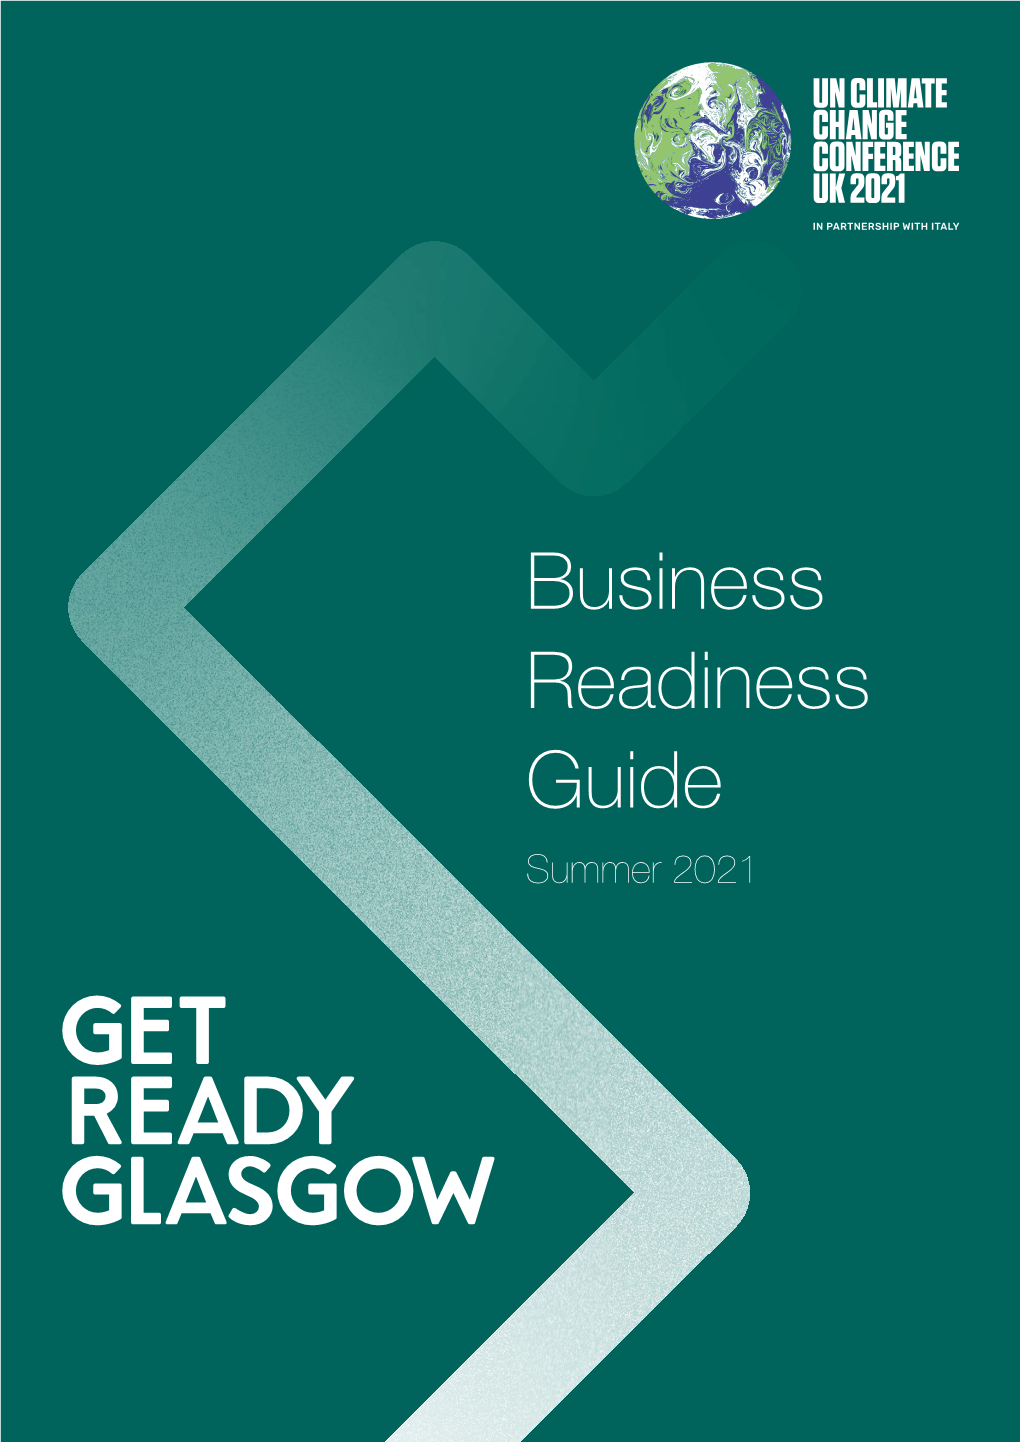 Business Readiness Guide Summer 2021 Contents